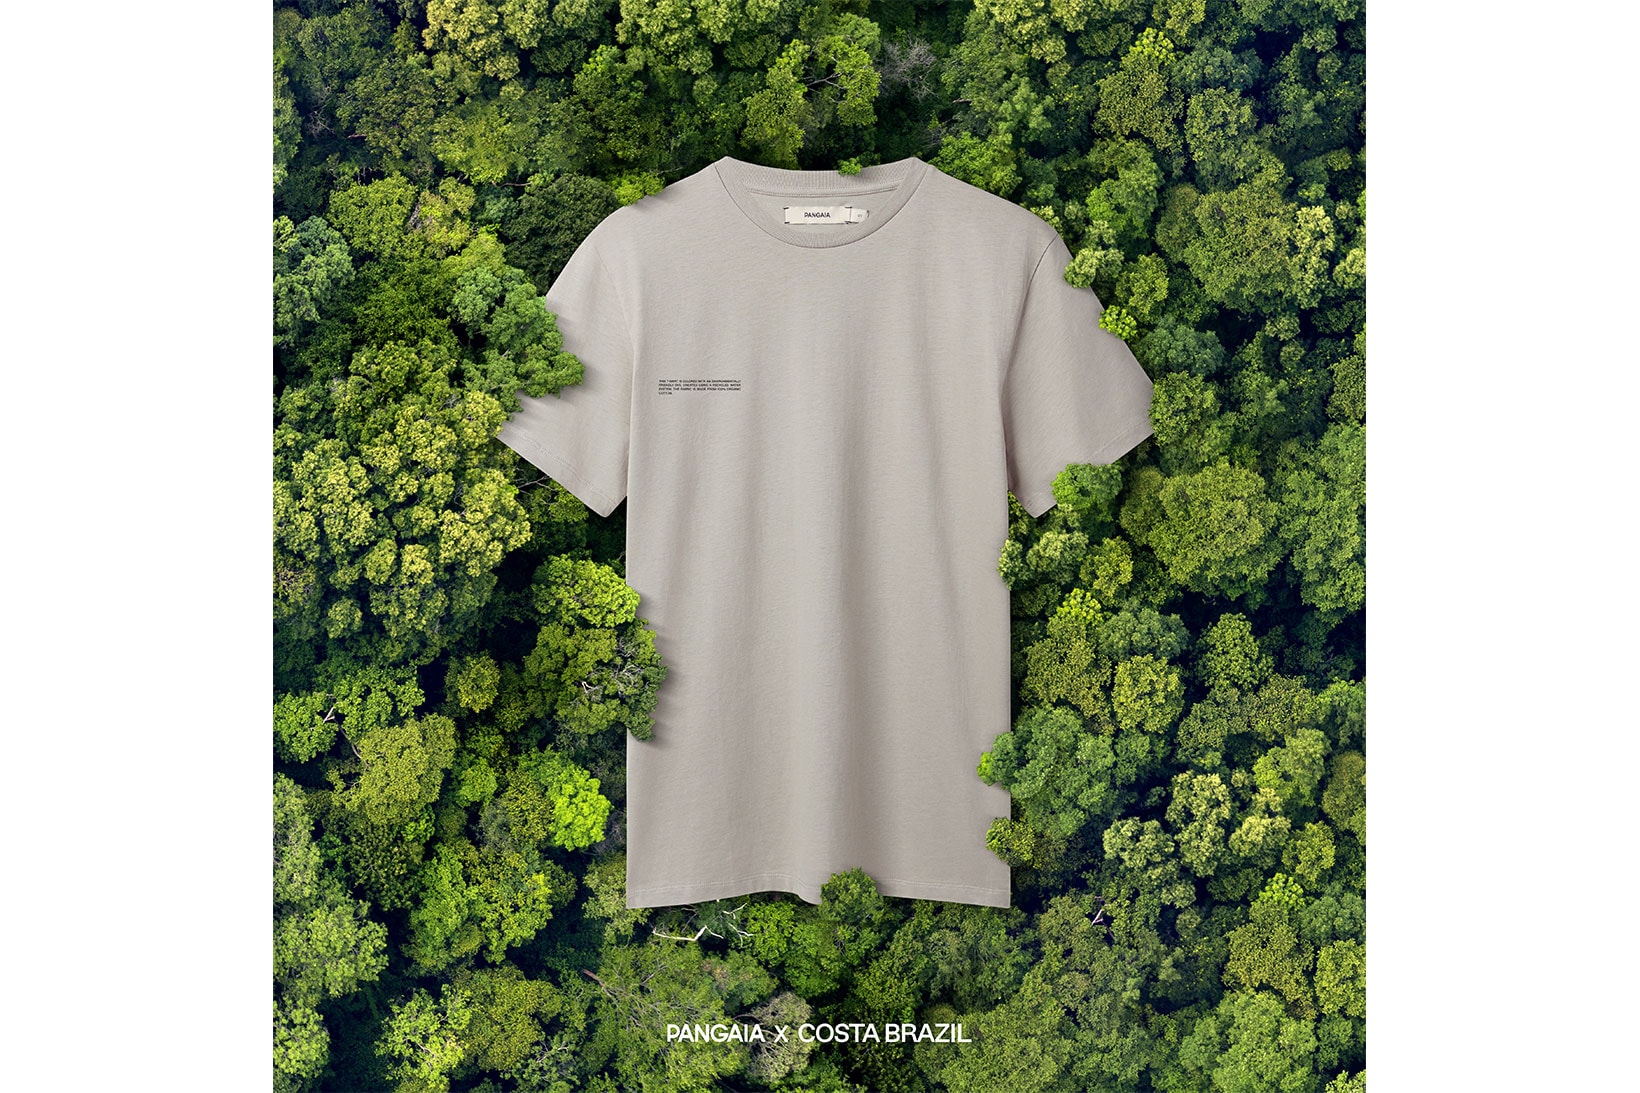 costa brazil pangaia amazon rainforest forever collaboration eco-friendly hoodies t-shirts release price